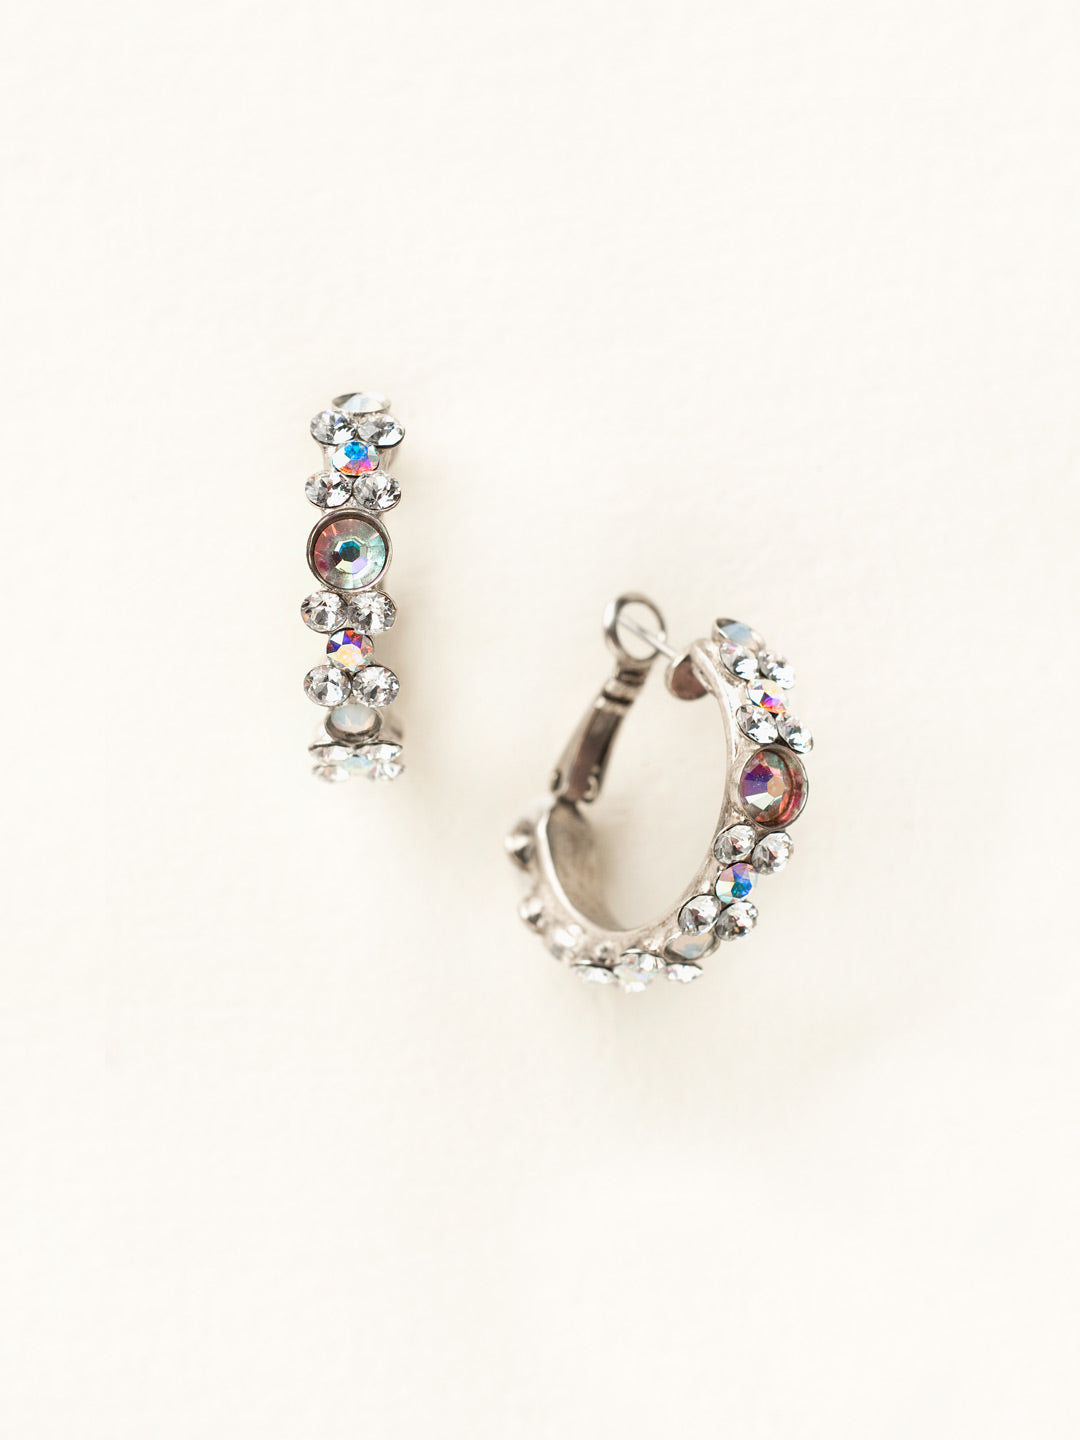 Floral Hoop Earrings - EBP15ASWBR - <p>Intricate design, infused with gorgeous shine. A motif of floral clusters is featured here on a small, delicate hoop with a hinged post backing. From Sorrelli's White Bridal collection in our Antique Silver-tone finish.</p>